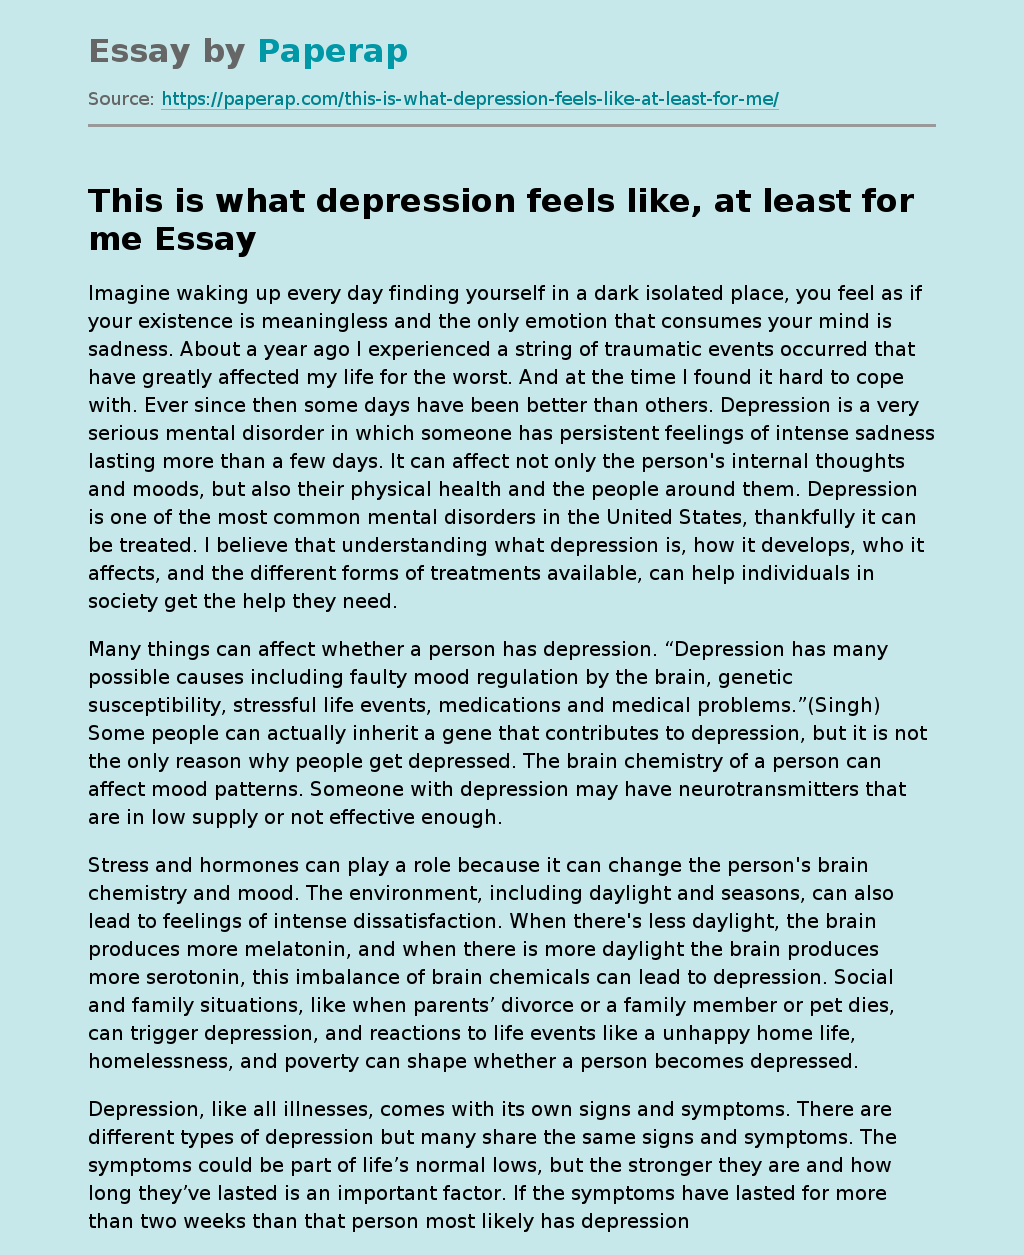 This is what depression feels like, at least for me